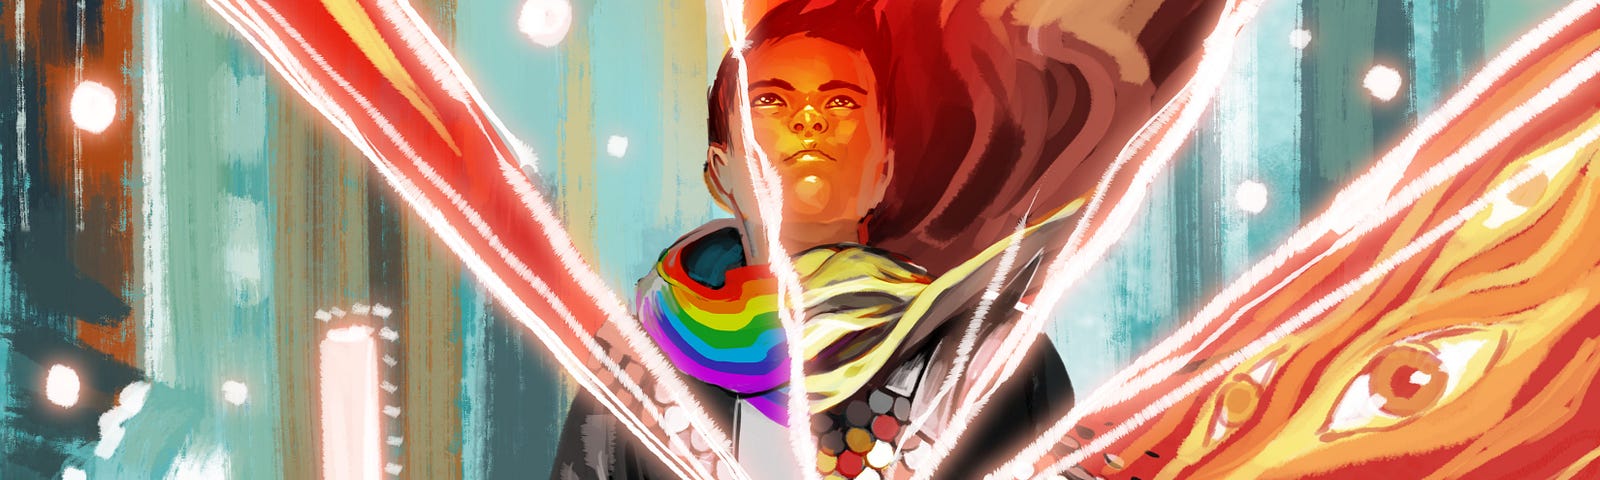 Interior art from Die: The RPG. A young man stand both in the real and fantasy world. His real world self wears a white t-shirt, black pants and leather jacket, and a rainbow scarf. His fantasy self wears silver, copper, and gold scale mail armor and a gold scarf. An 8-sided die floats over his open hand, sending out “tears” in the fabric of reality, revealing his fantasy self. He looks up at a flaming sword, with eyes in the flames, floating above him in the fantasy world.